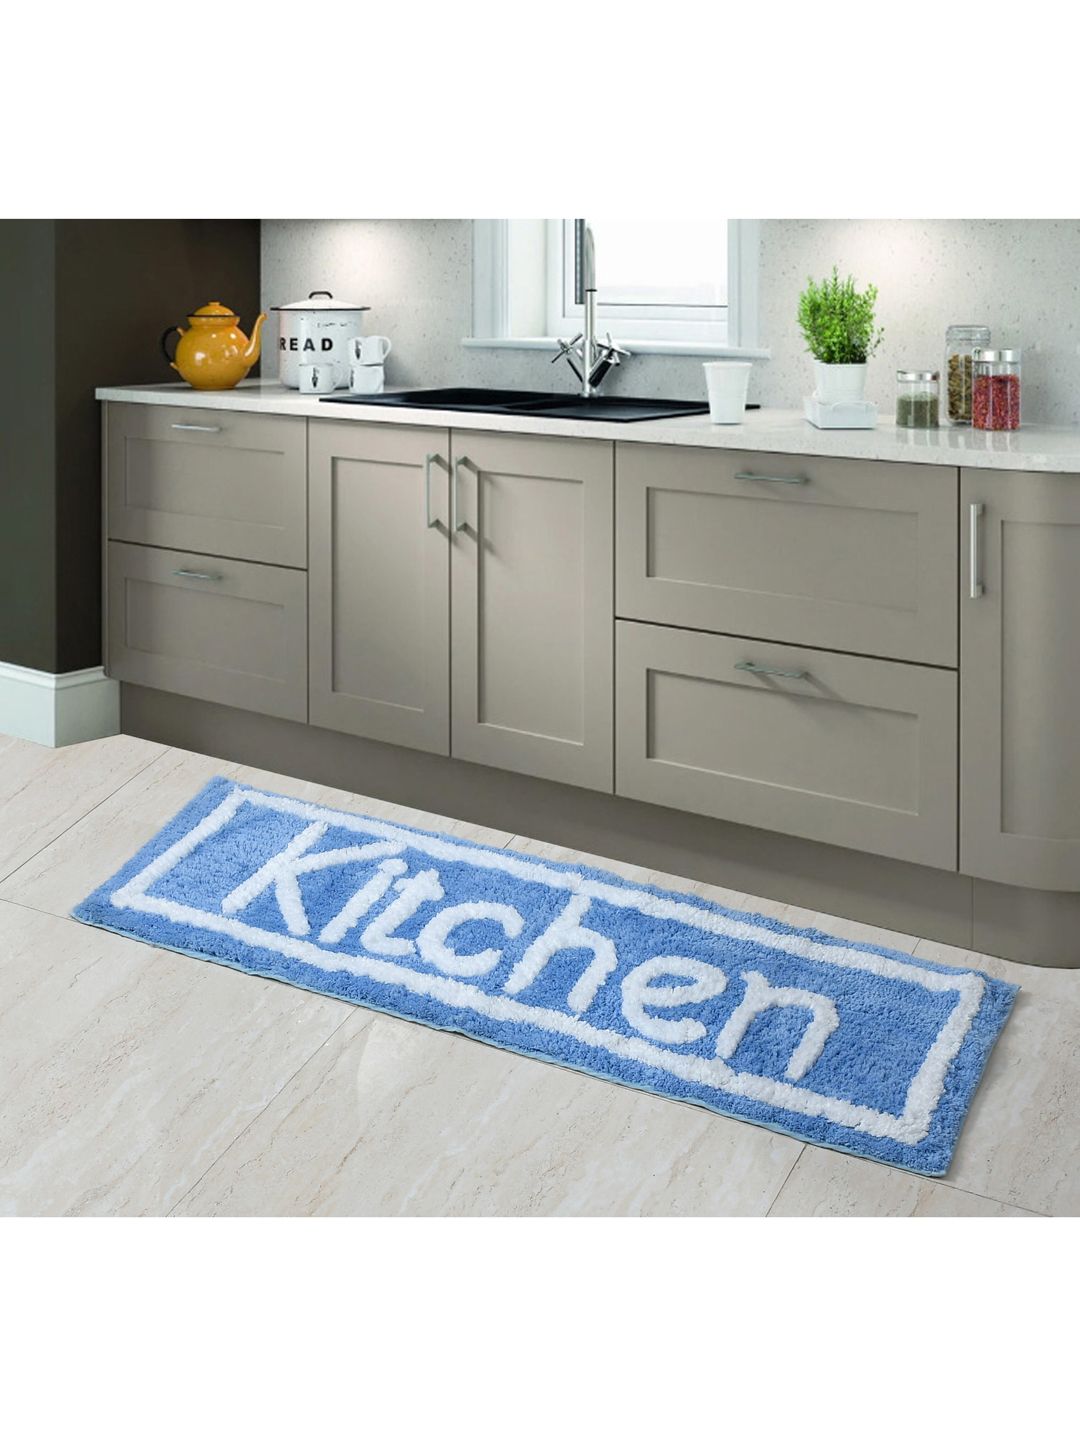 AEROHAVEN Turquoise Blue Quirky Anti Slip Kitchen Runner Price in India